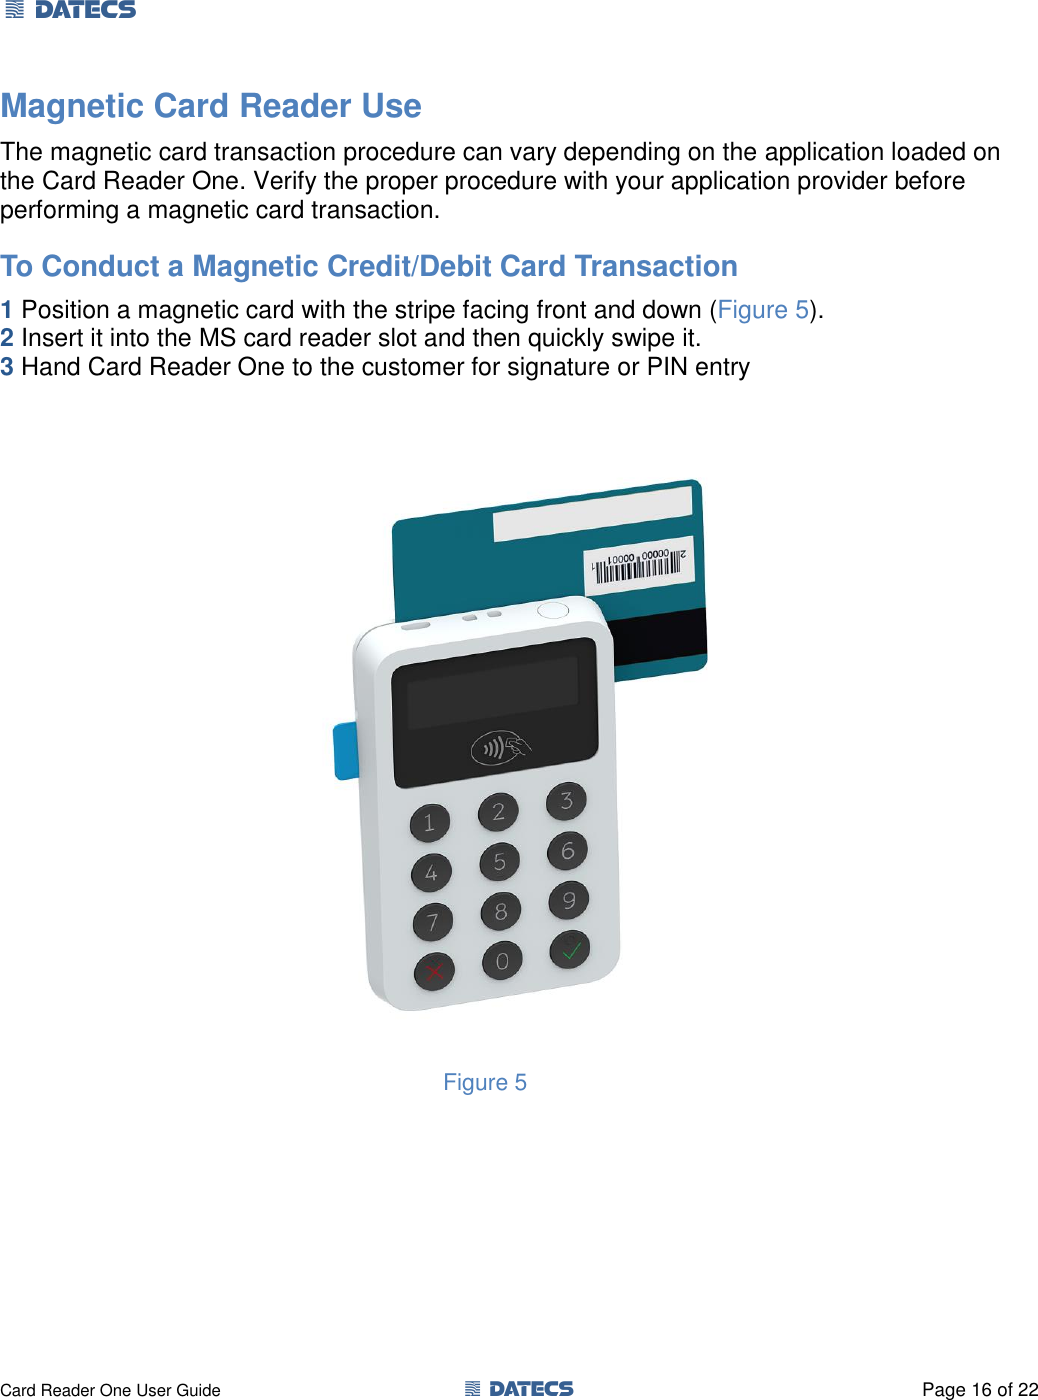 1 DATECS       Card Reader One User Guide  1 DATECS  Page 16 of 22 Magnetic Card Reader Use The magnetic card transaction procedure can vary depending on the application loaded on the Card Reader One. Verify the proper procedure with your application provider before performing a magnetic card transaction. To Conduct a Magnetic Credit/Debit Card Transaction 1 Position a magnetic card with the stripe facing front and down (Figure 5). 2 Insert it into the MS card reader slot and then quickly swipe it.  3 Hand Card Reader One to the customer for signature or PIN entry                            Figure 5      